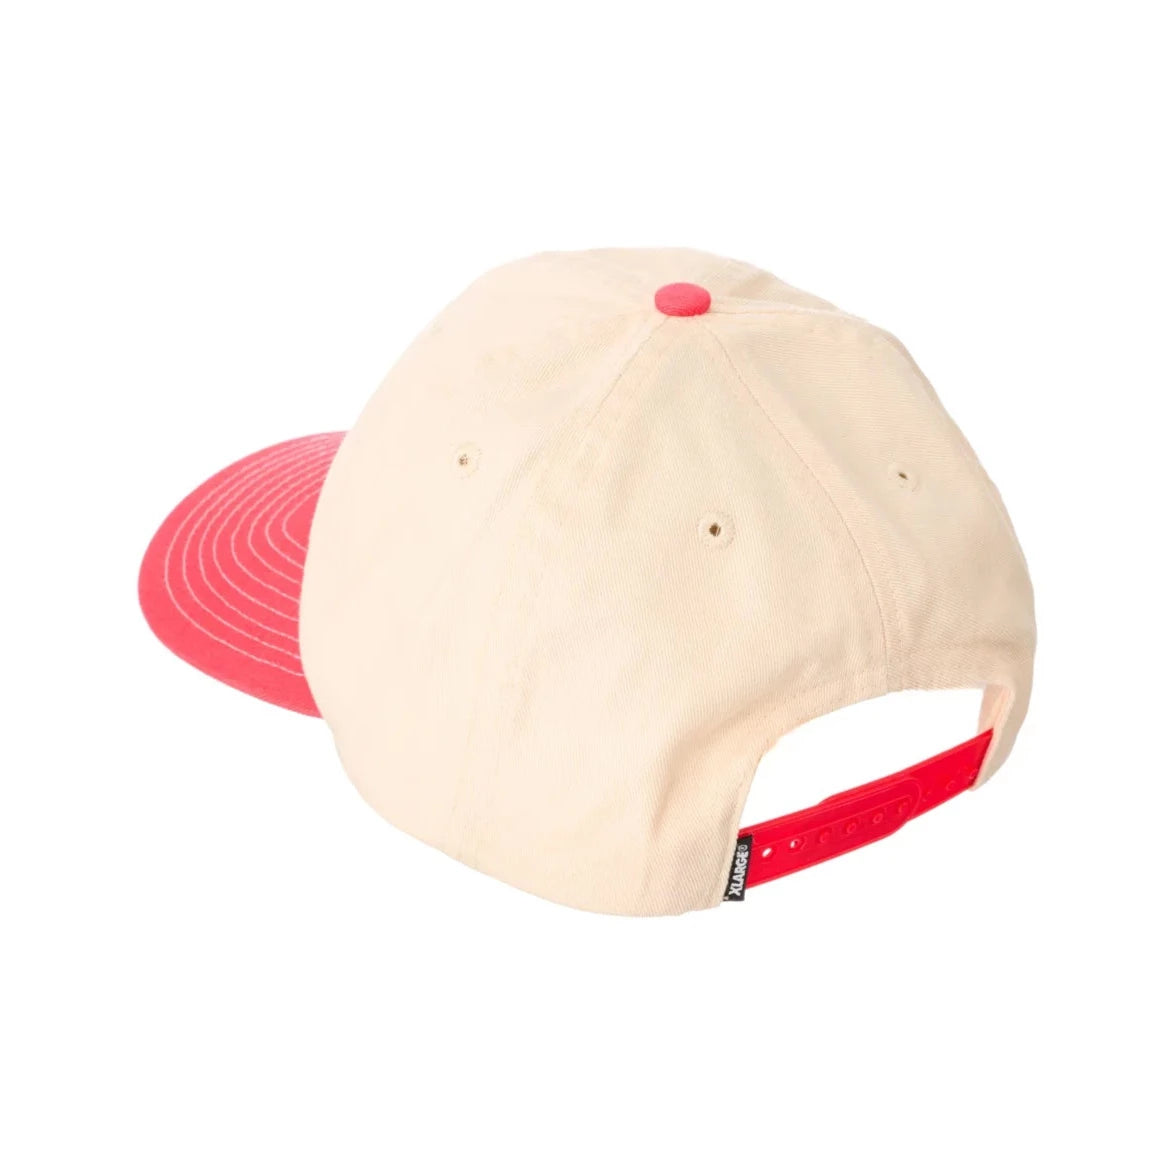 X-Large Apples Low Pro Cap Washed White / Red